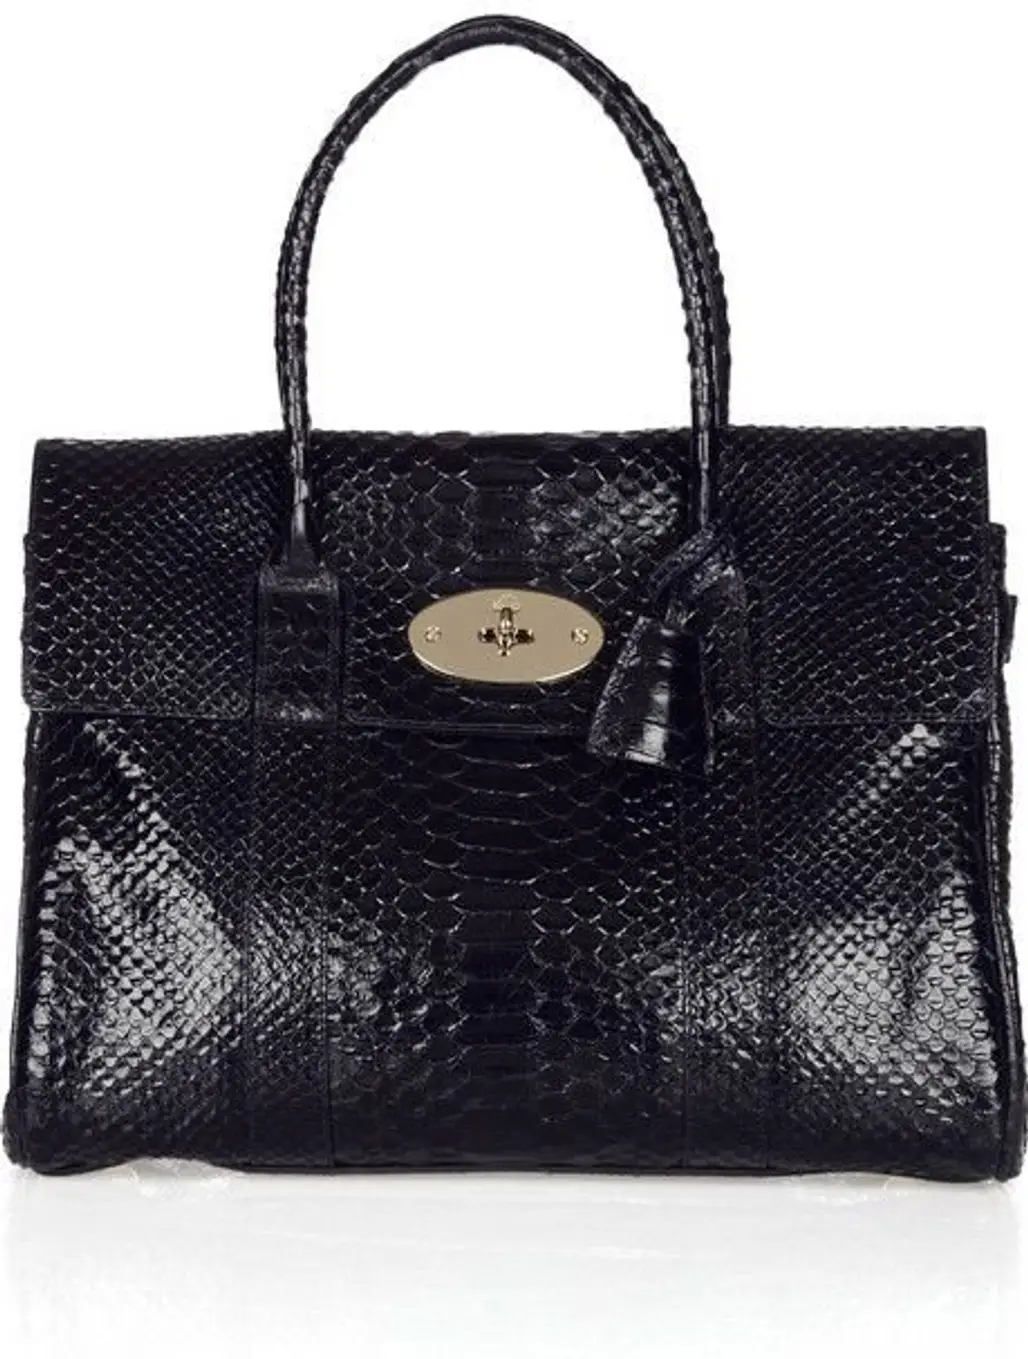 Mulberry Bayswater Leather Bag